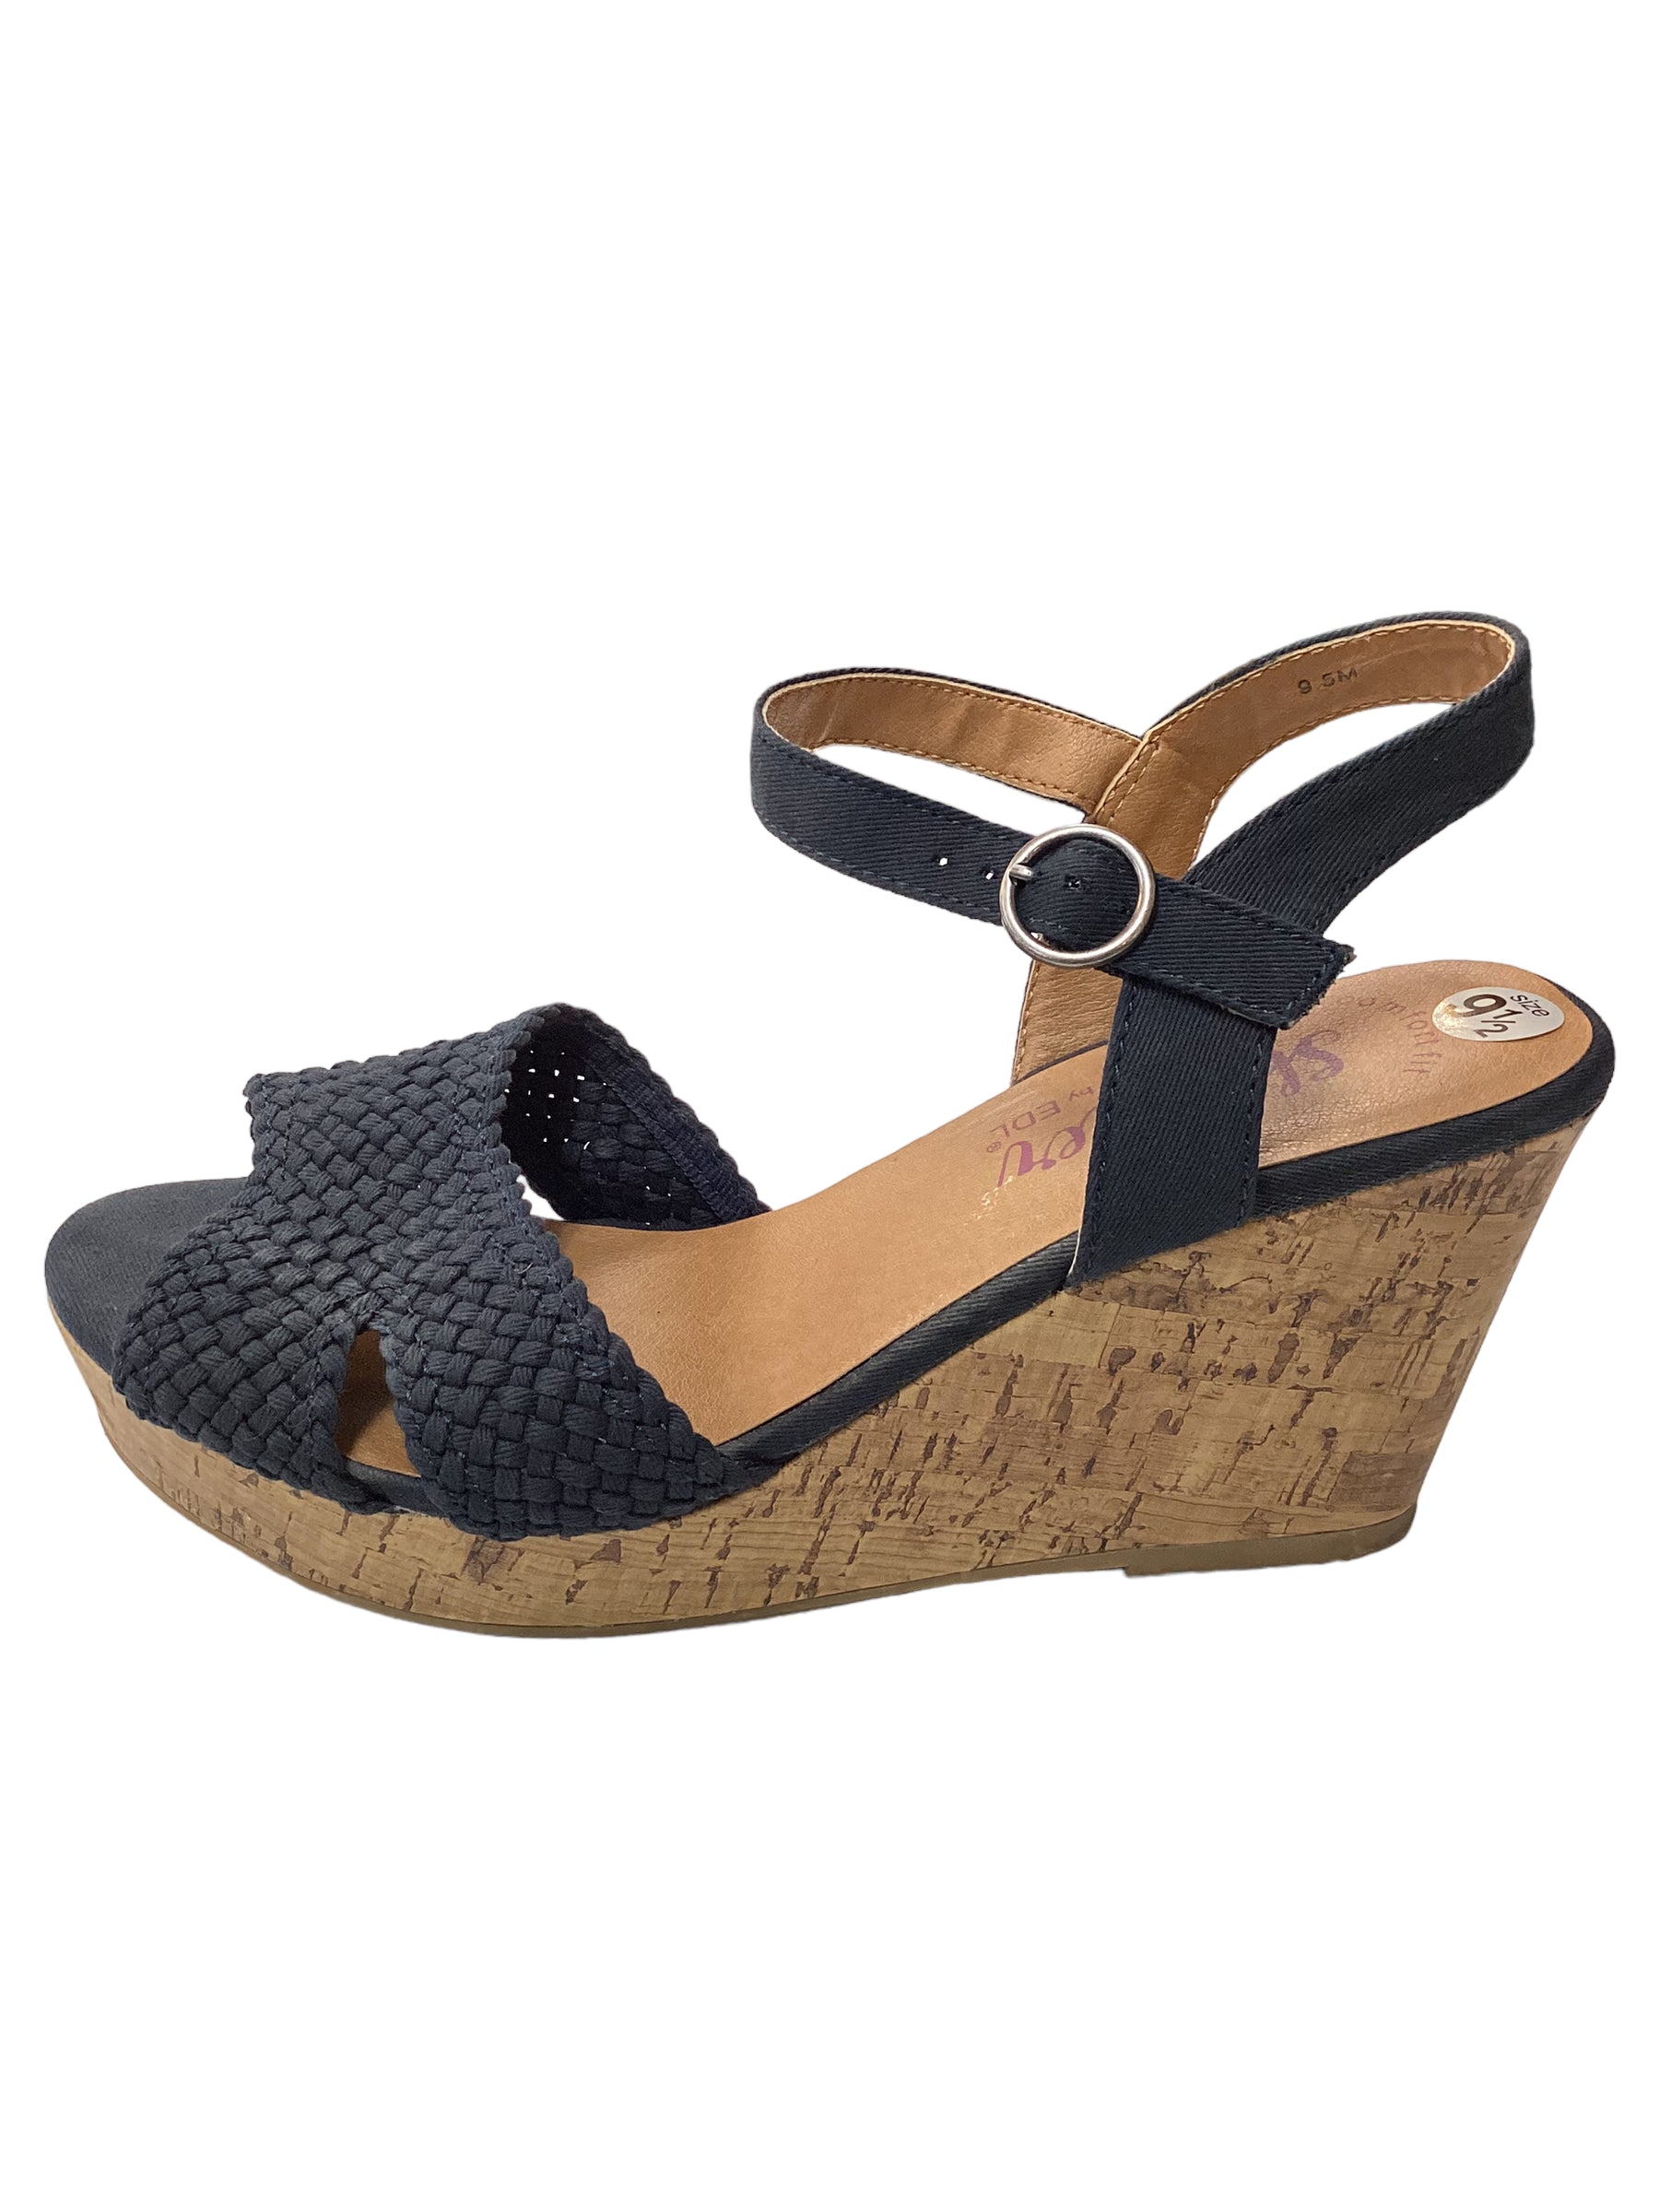 Sandals Heels Wedge By Clothes Mentor Size: 9.5 – Clothes Mentor Columbus